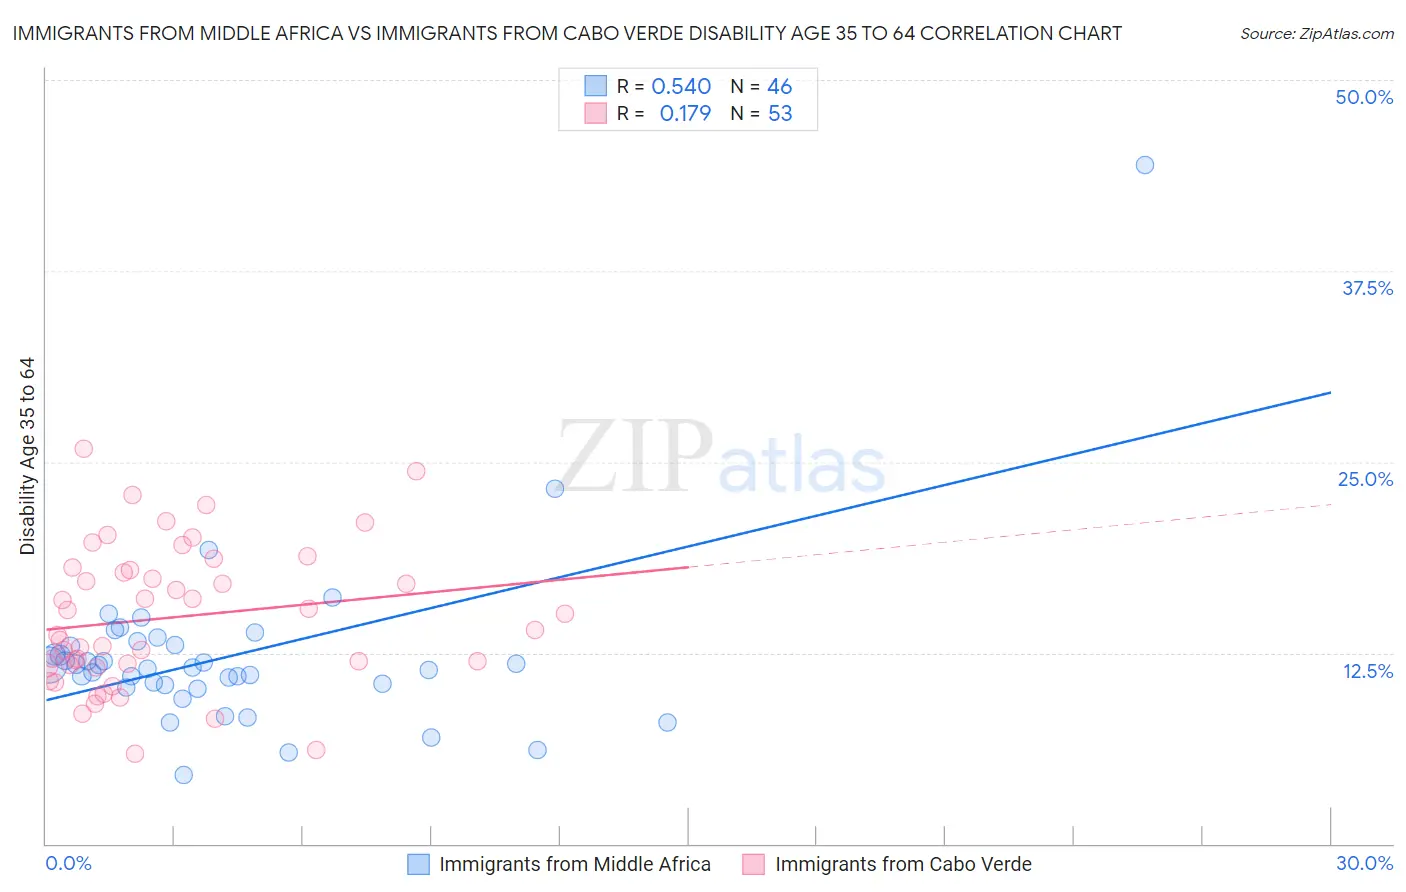 Immigrants from Middle Africa vs Immigrants from Cabo Verde Disability Age 35 to 64